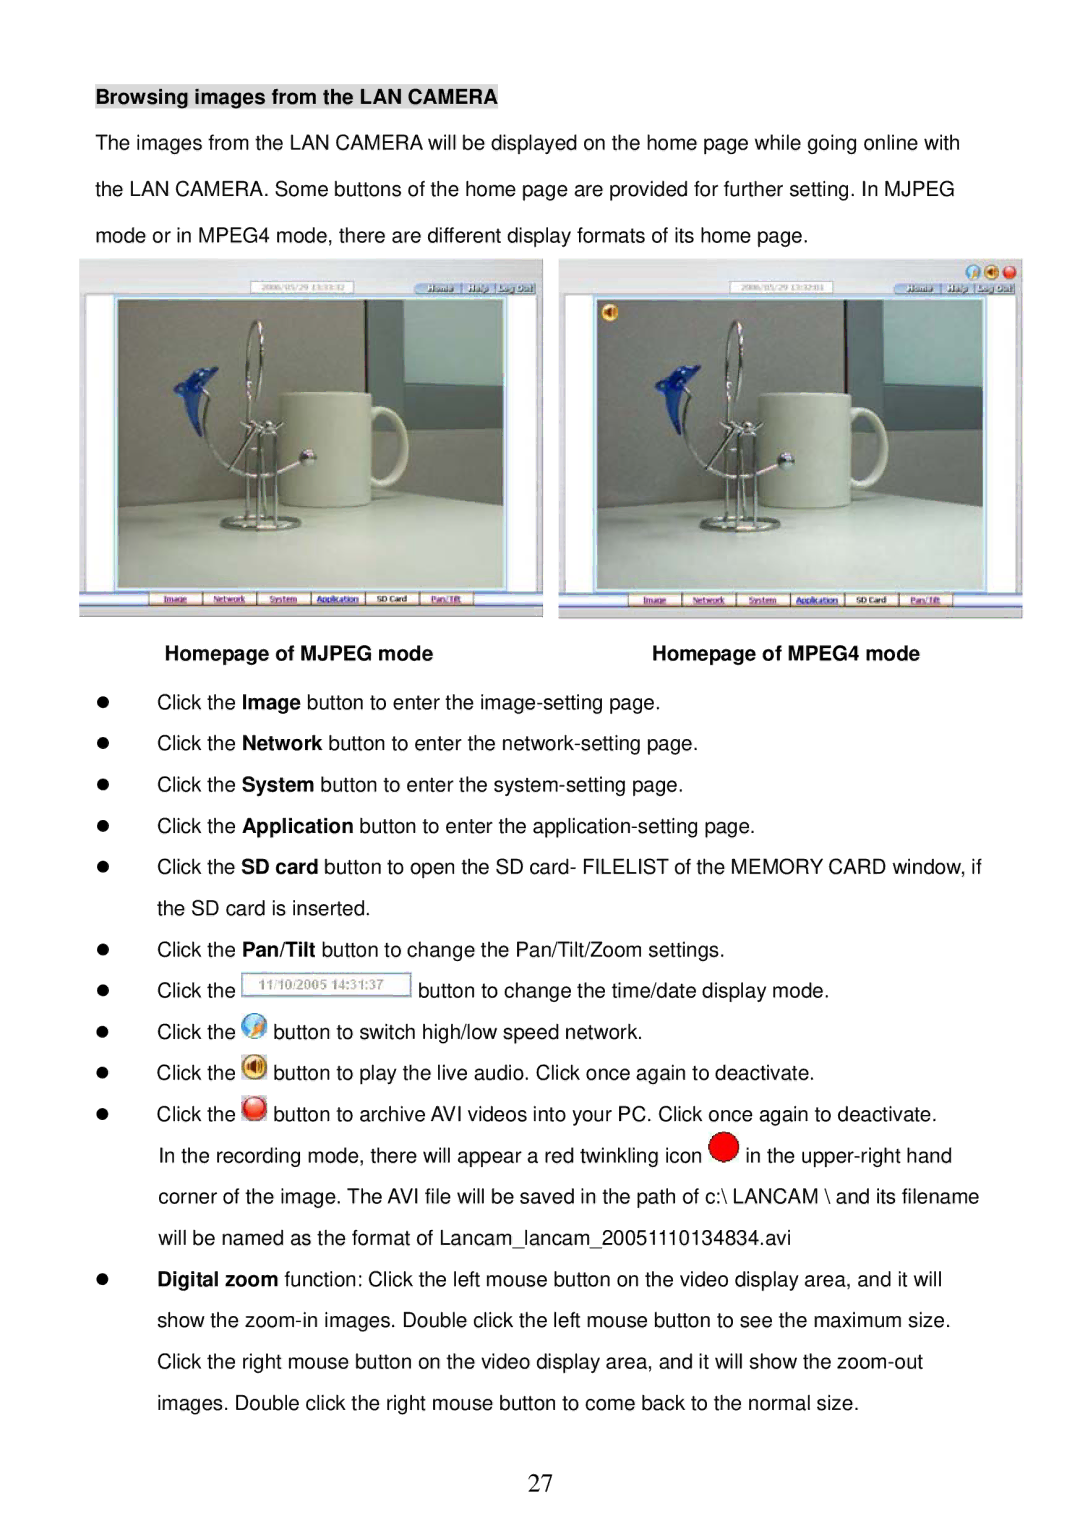 Sony MPEG4 LAN Camera operation manual Browsing images from the LAN Camera, Homepage of Mjpeg mode 